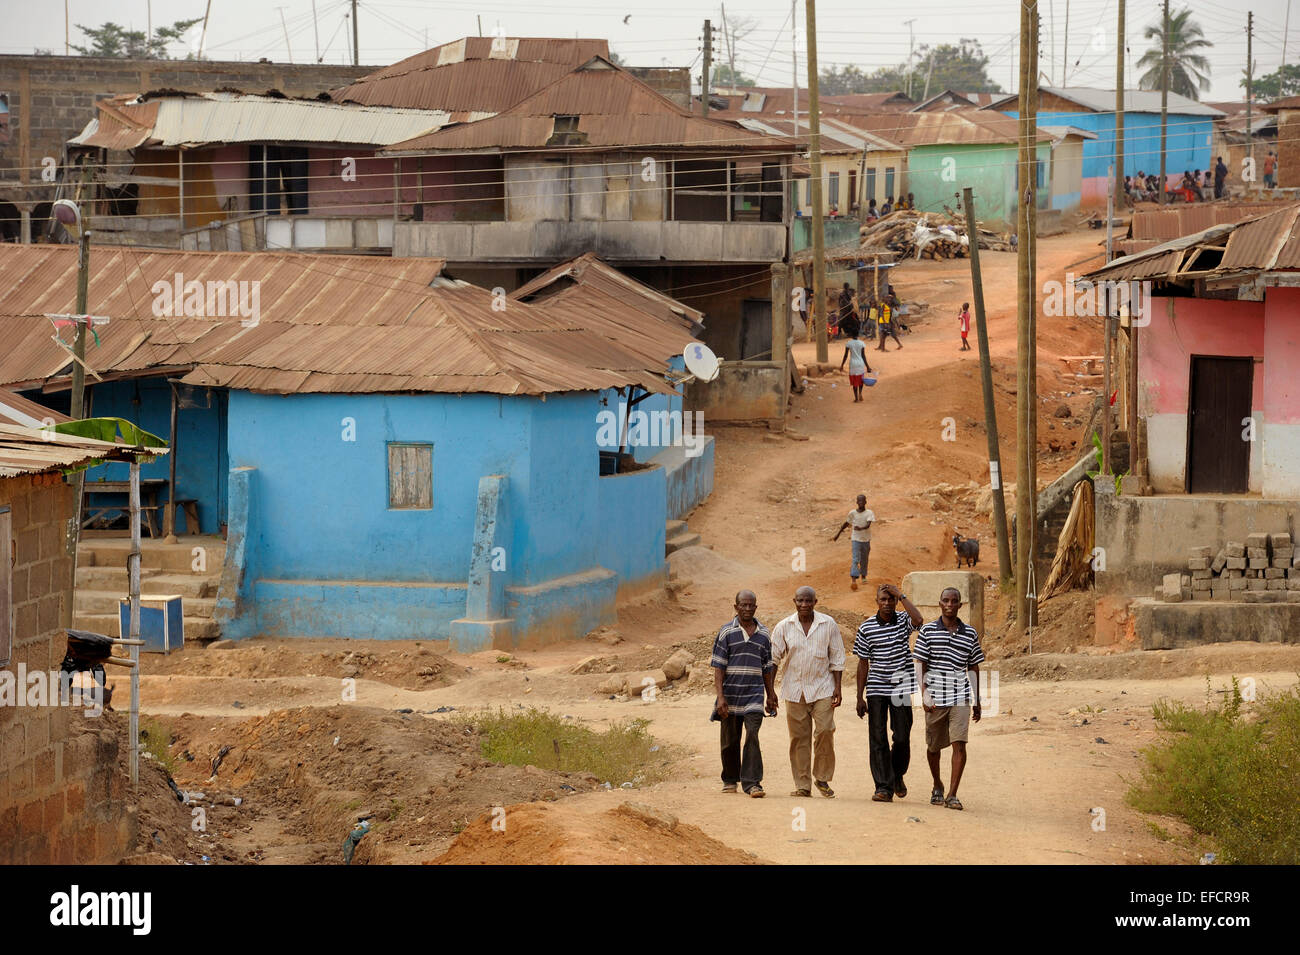 Street view of Esiam, Ghana, West Africa. Stock Photo